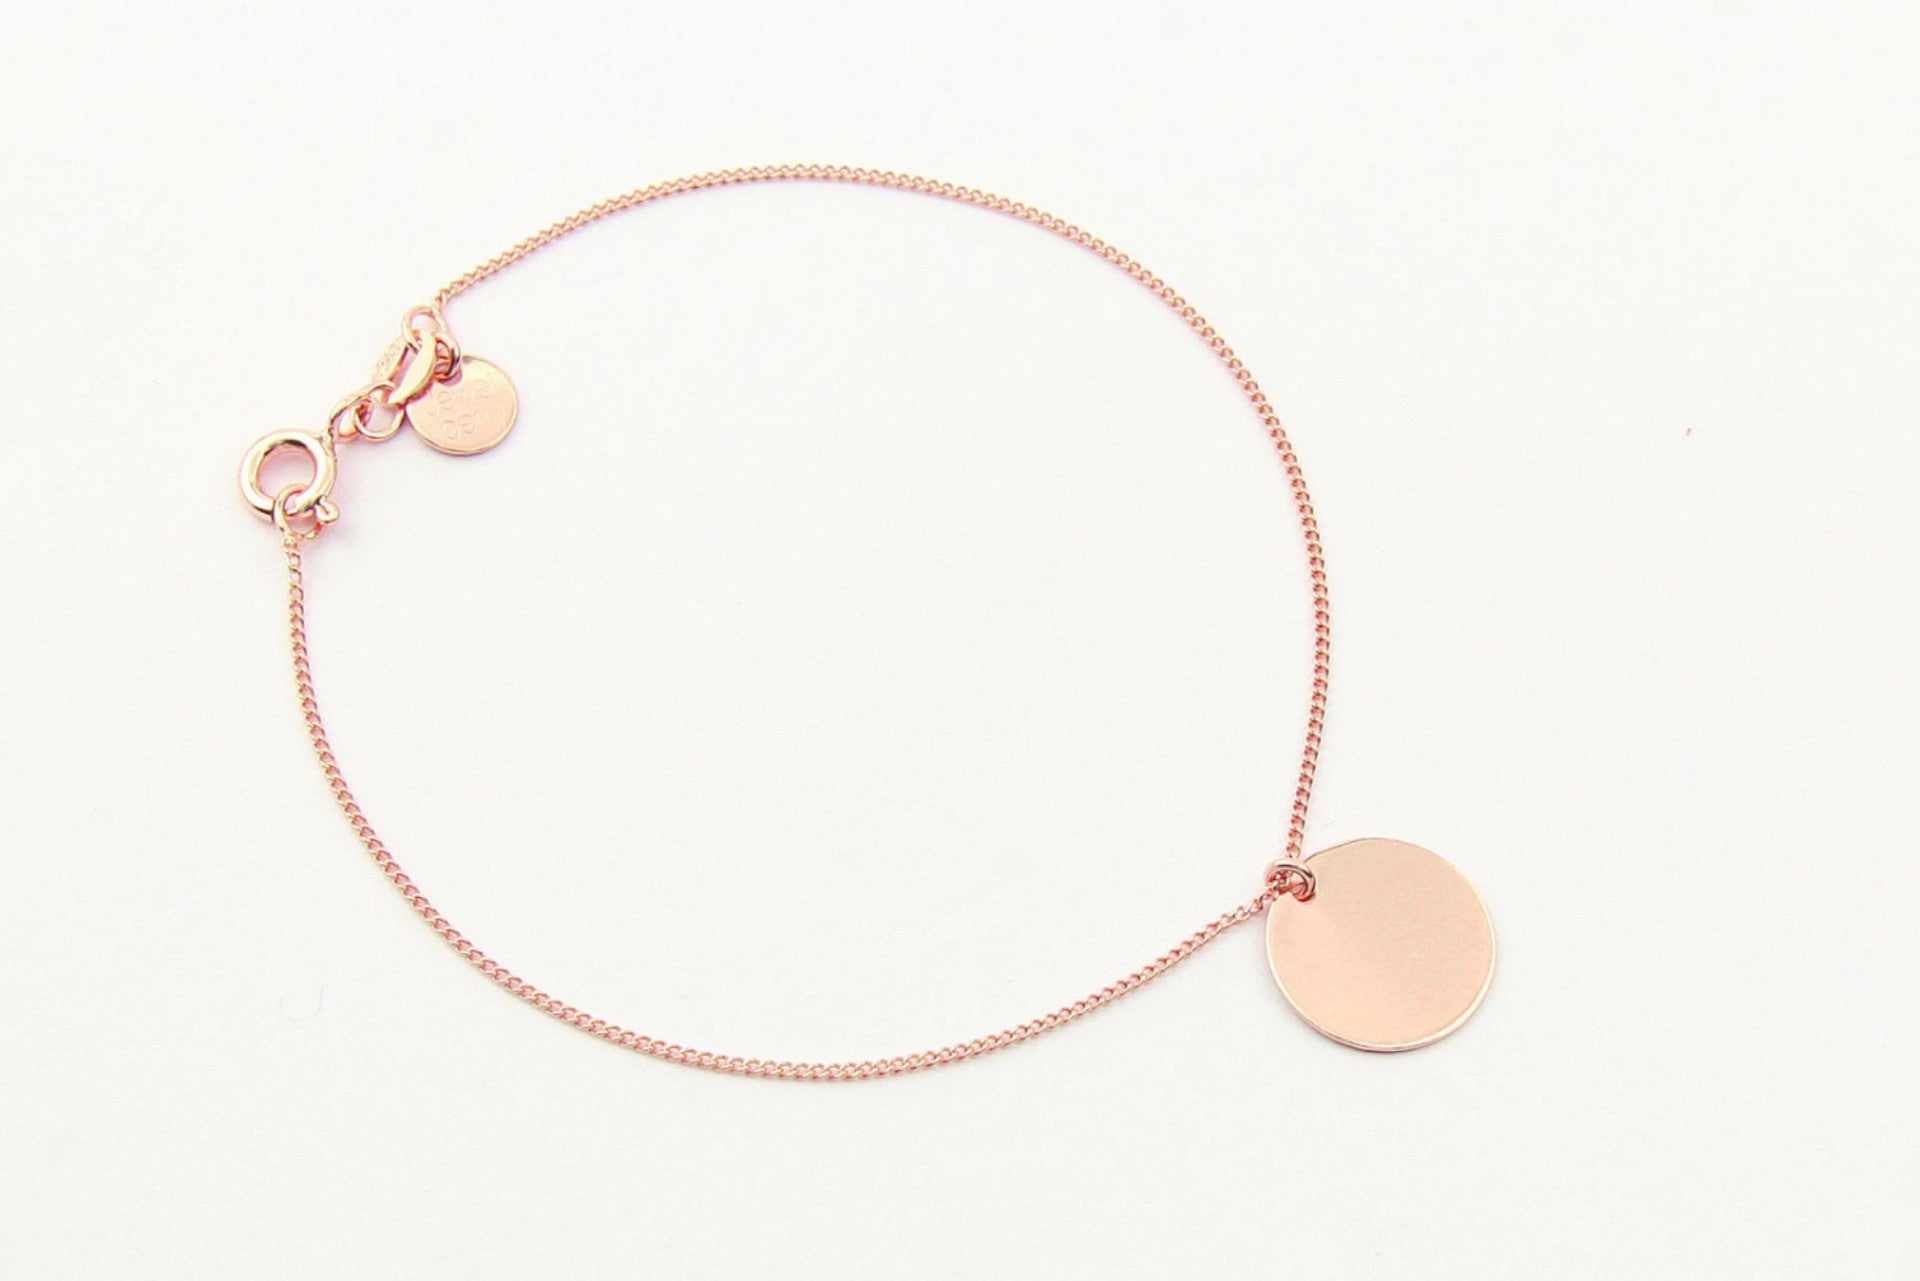 jewelberry armband bracelet medium disc rose gold plated sterling silver fine jewelry handmade with love fairtrade curb chain